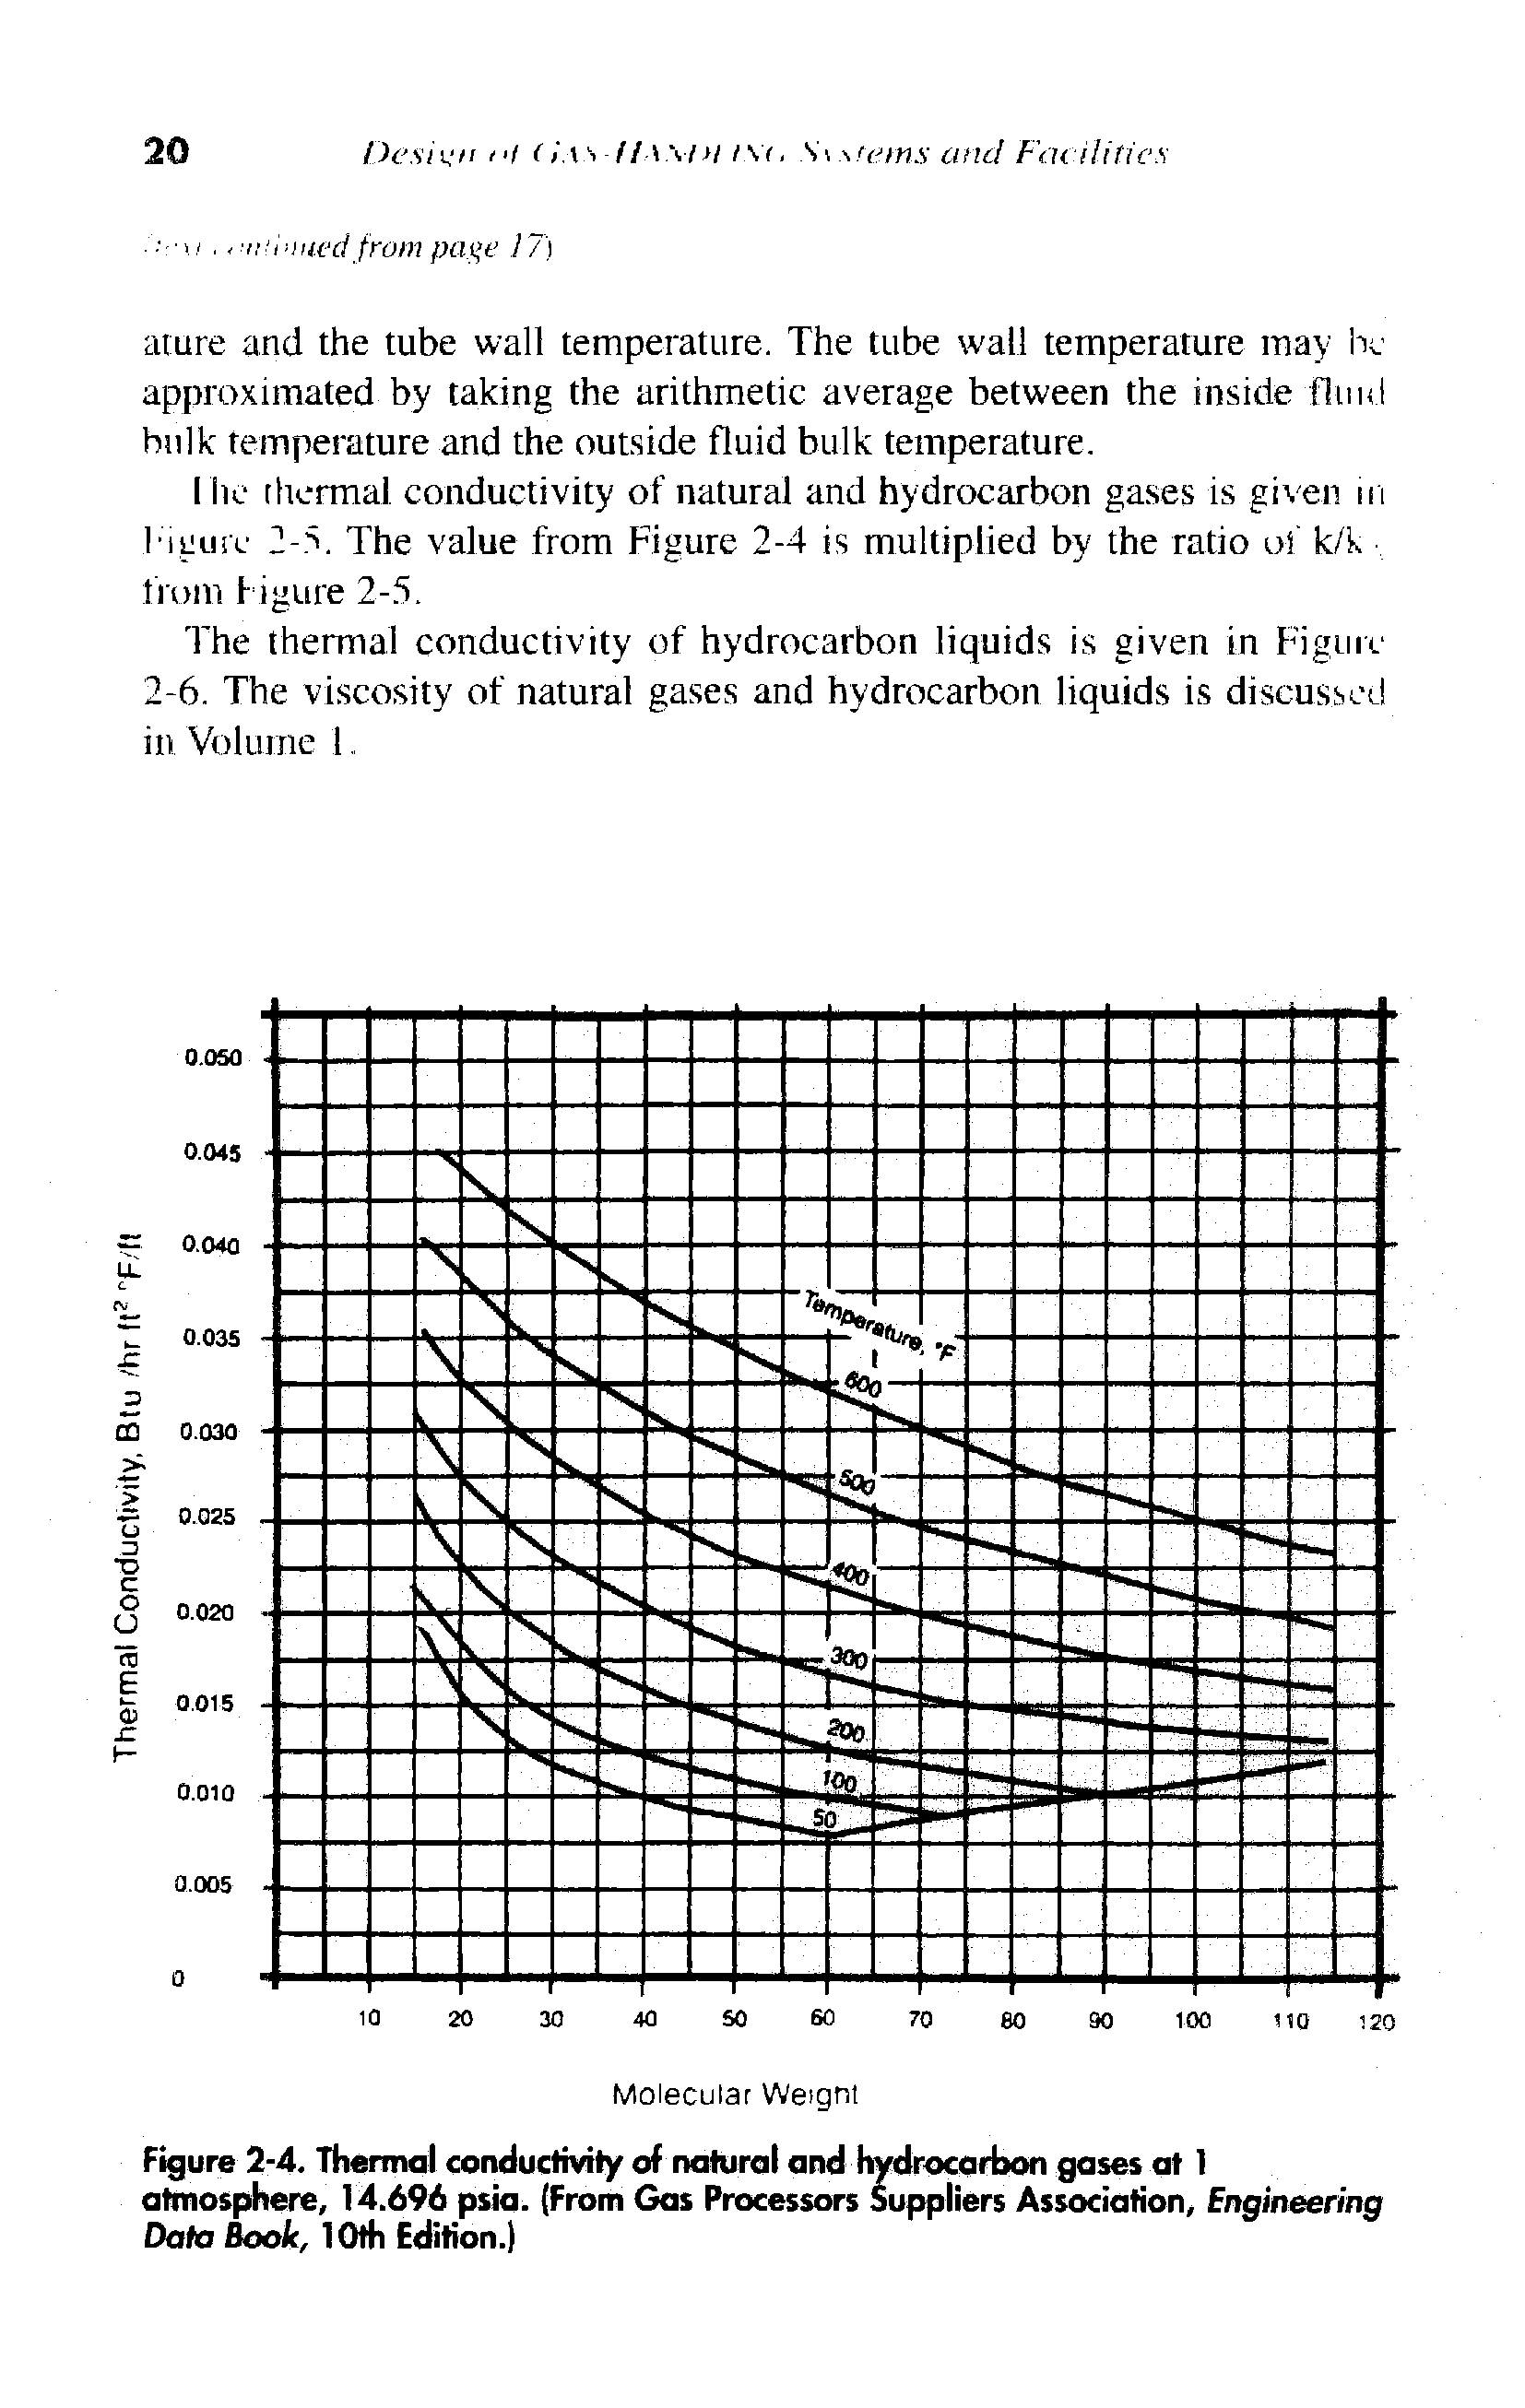 Figure 2-4. Thermal conductivity of natural and hydrocarbon gases at 1 atmosphere, 14.696 psia. (From Gas Processors Suppliers Association, Engineering Data Book, 10th Edition.)...